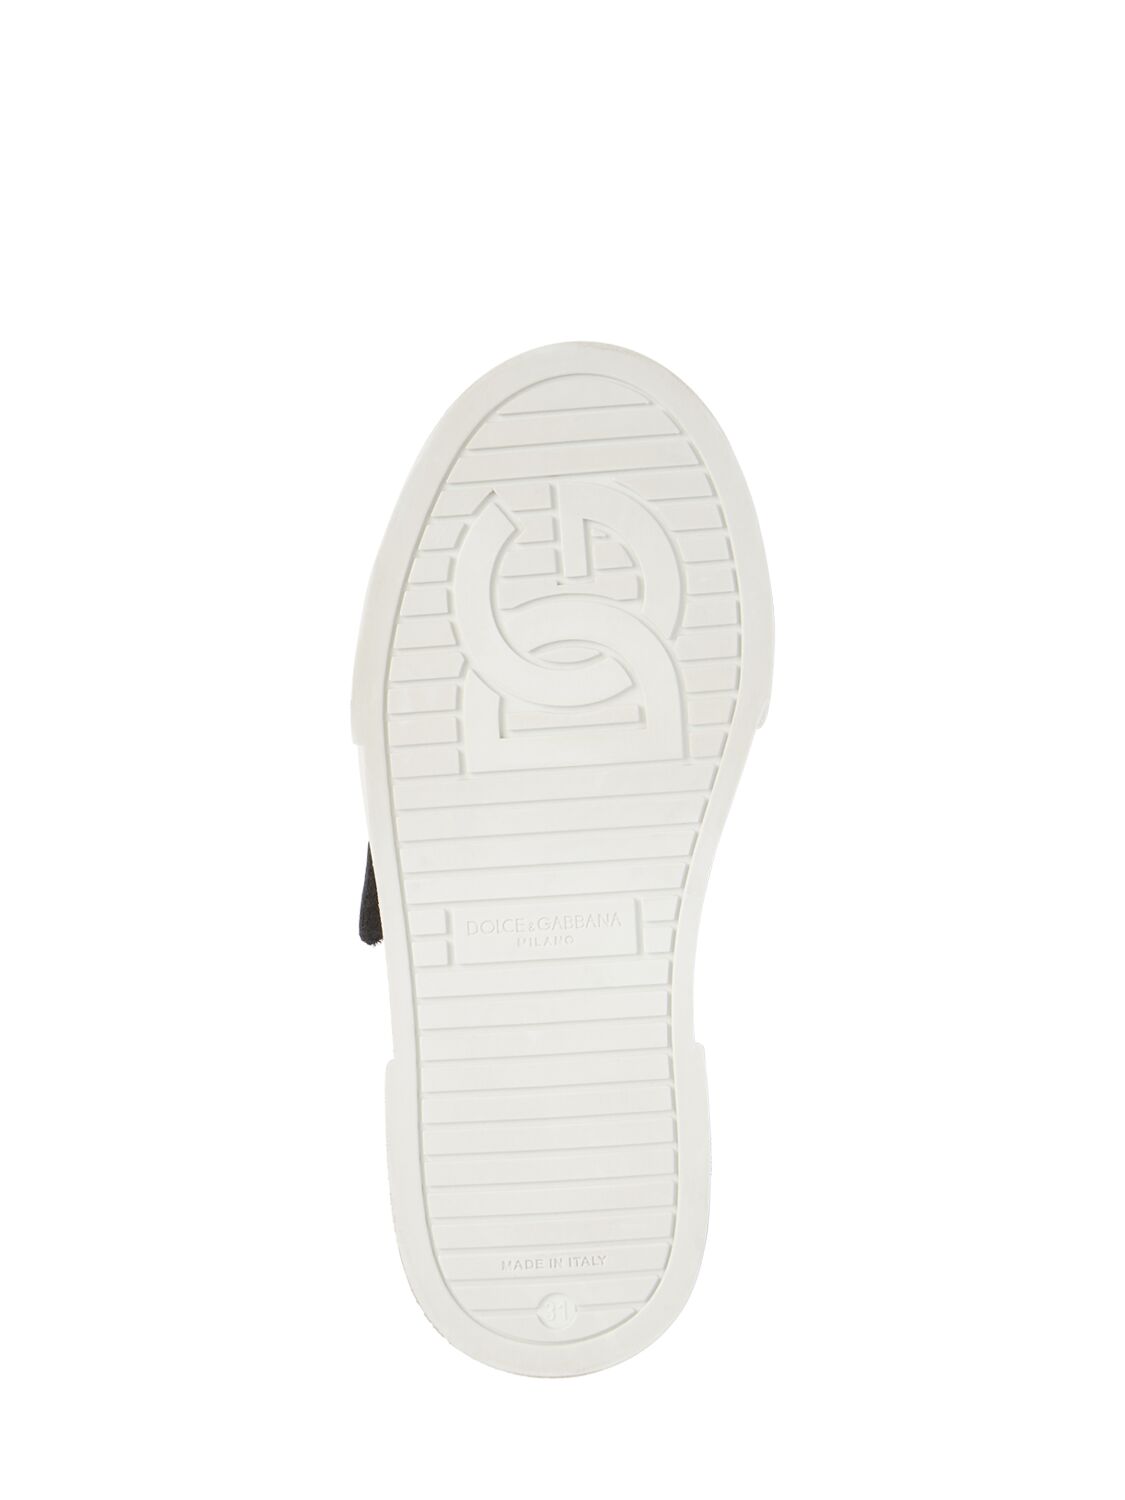 Shop Dolce & Gabbana Leather Strap Sneakers In White,black